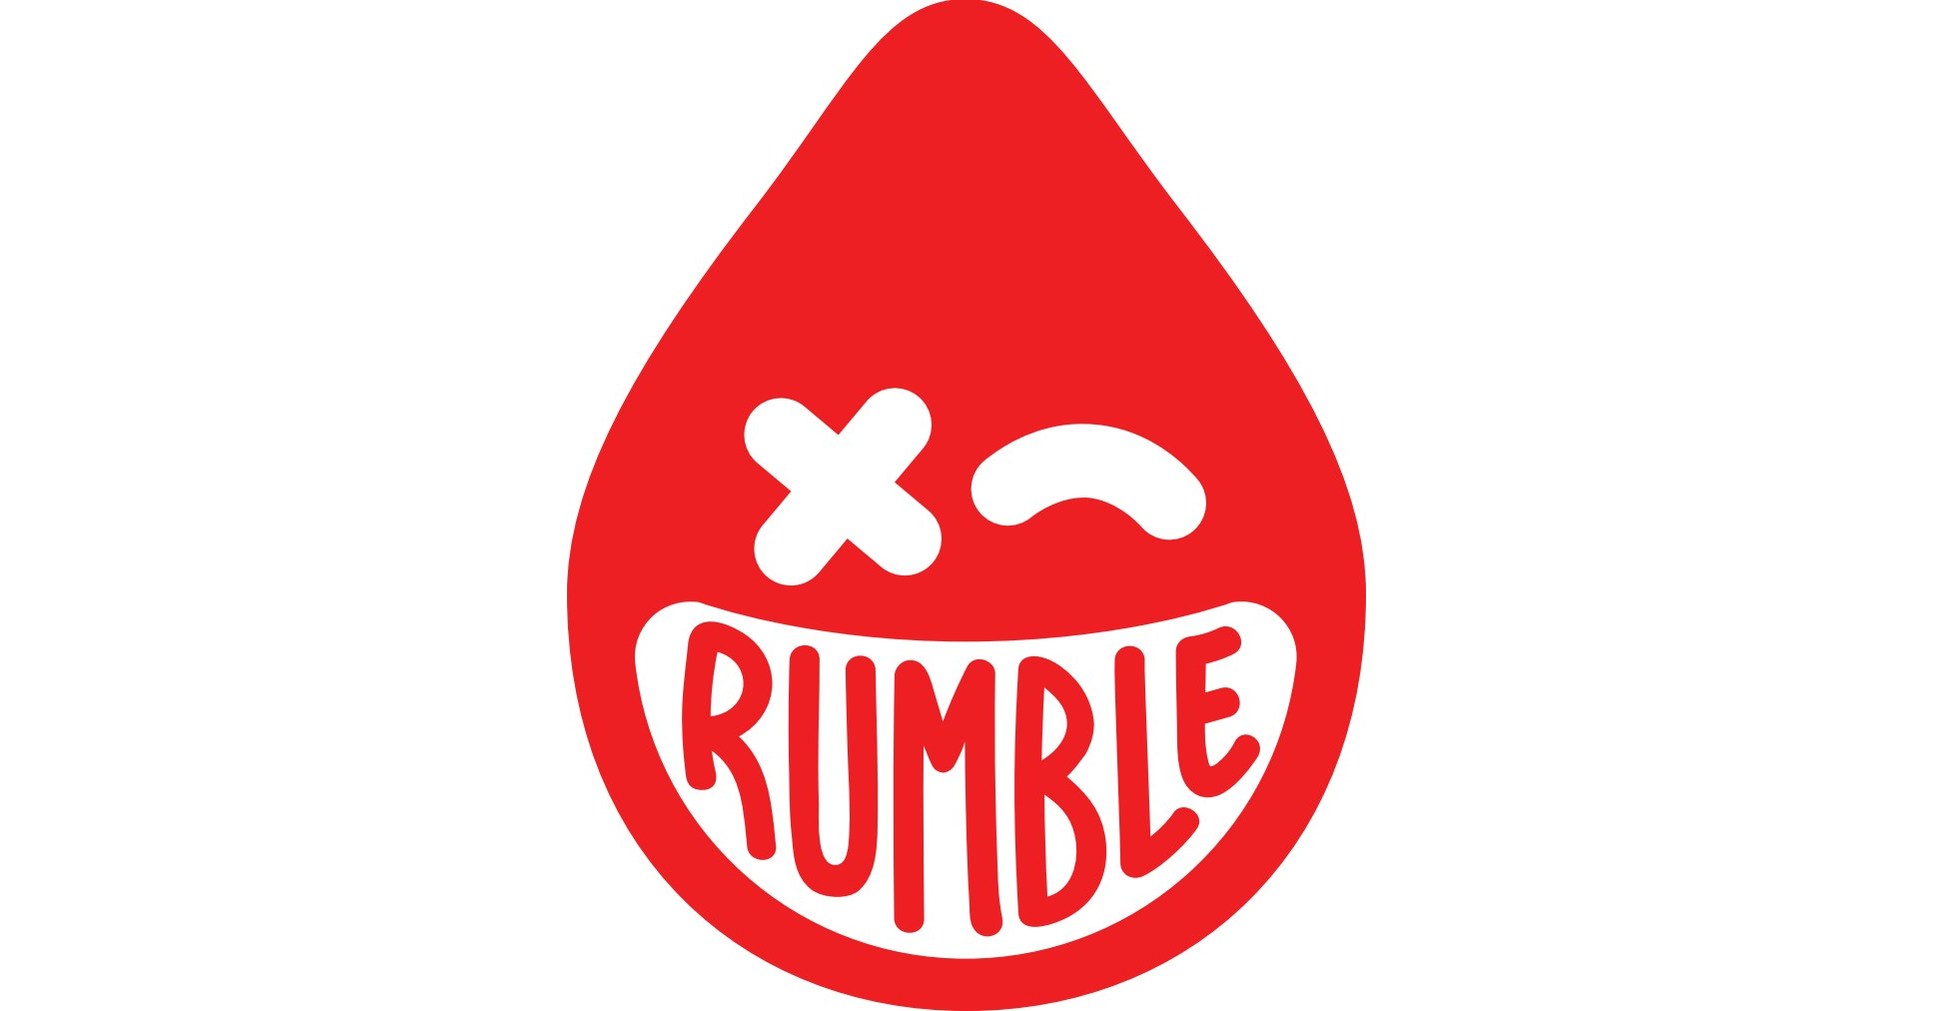 Rumble on Oct 16th at 11:30am ET